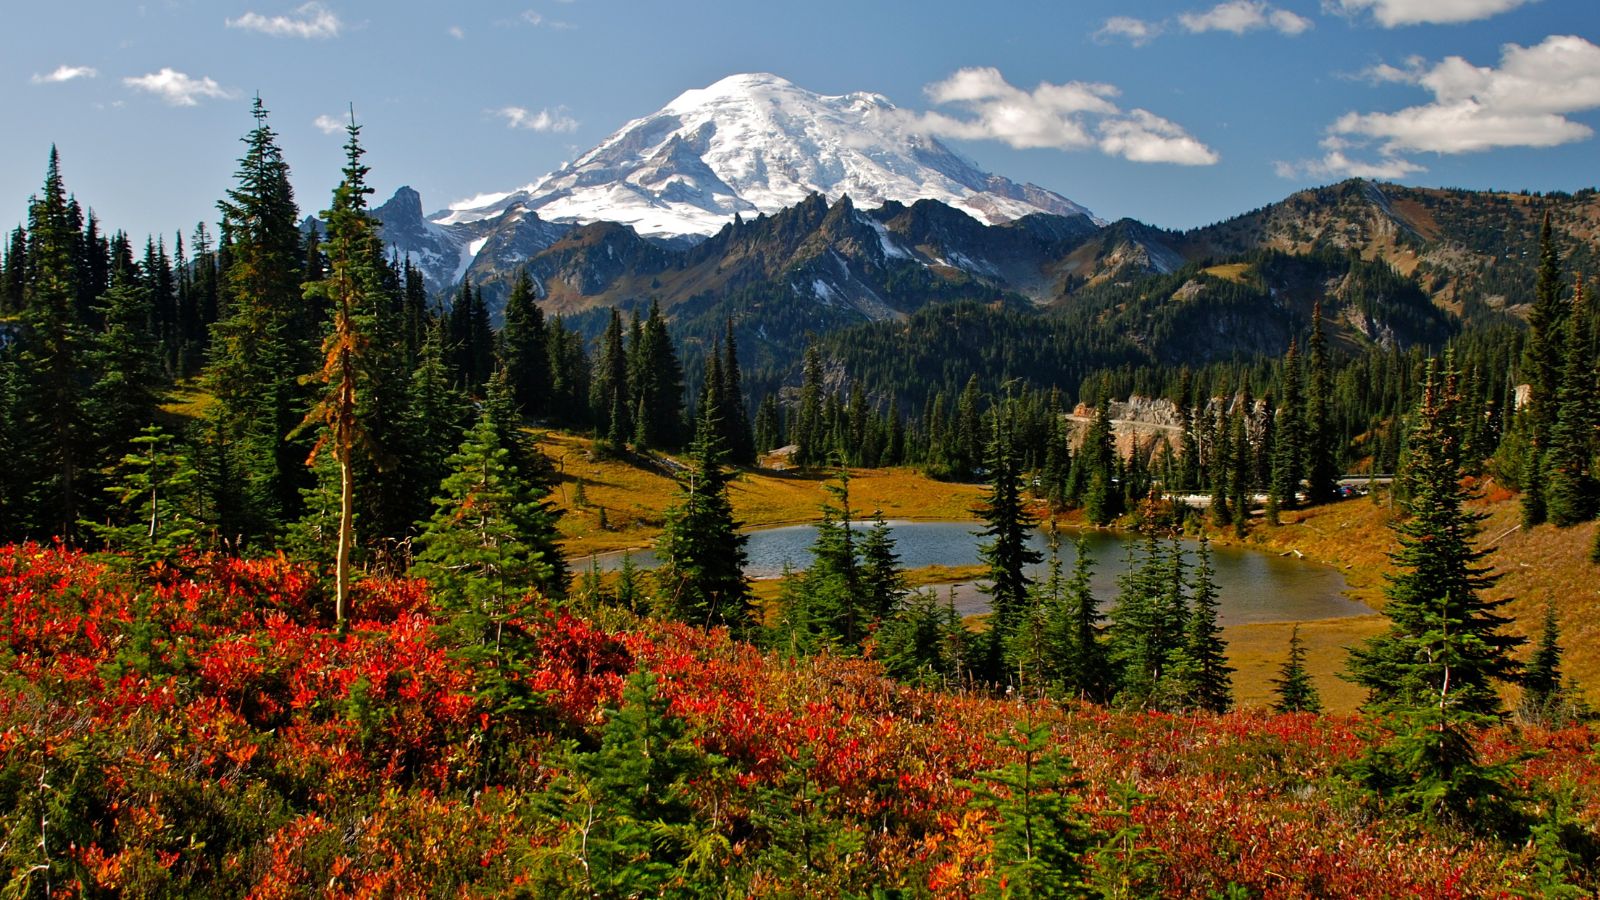 <p>A place for a great hike, along with incredible volcanic views, is Mt. Rainier National Park. This is supported by <a href="https://www.bemytravelmuse.com/best-places-in-usa-for-solo-travel/">Be My Travel Muse</a>, which writes, “It’s such a prominent volcano, you can see it from most major freeways and suburbs of Seattle.” If you enjoy your alone time, then it’s the best place to head.</p>